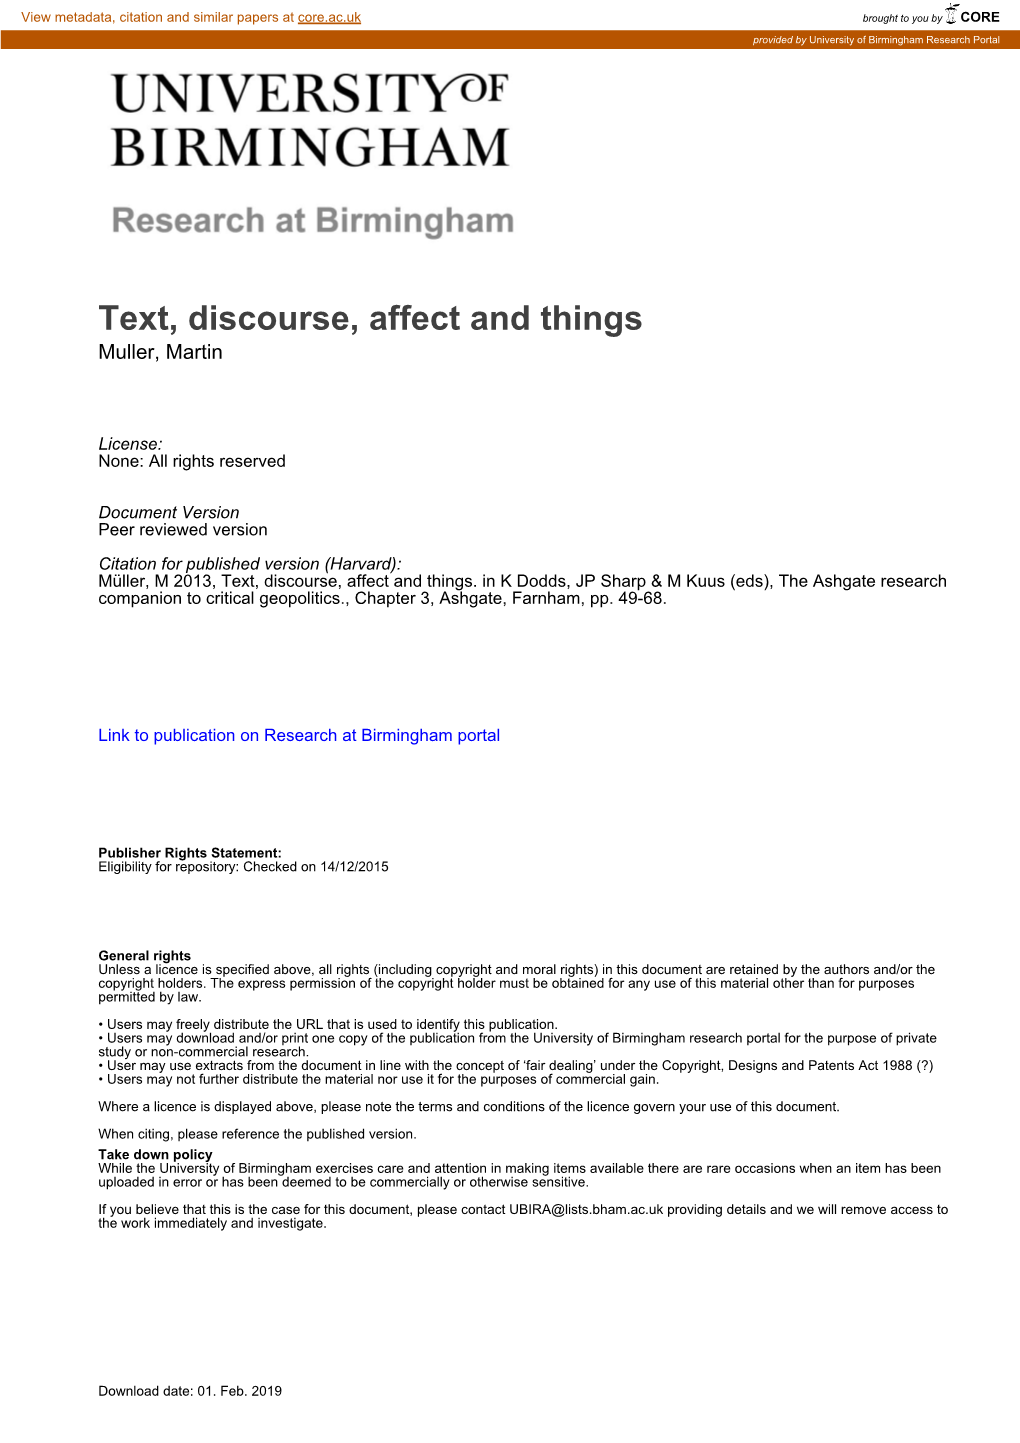 Text, Discourse, Affect and Things Muller, Martin